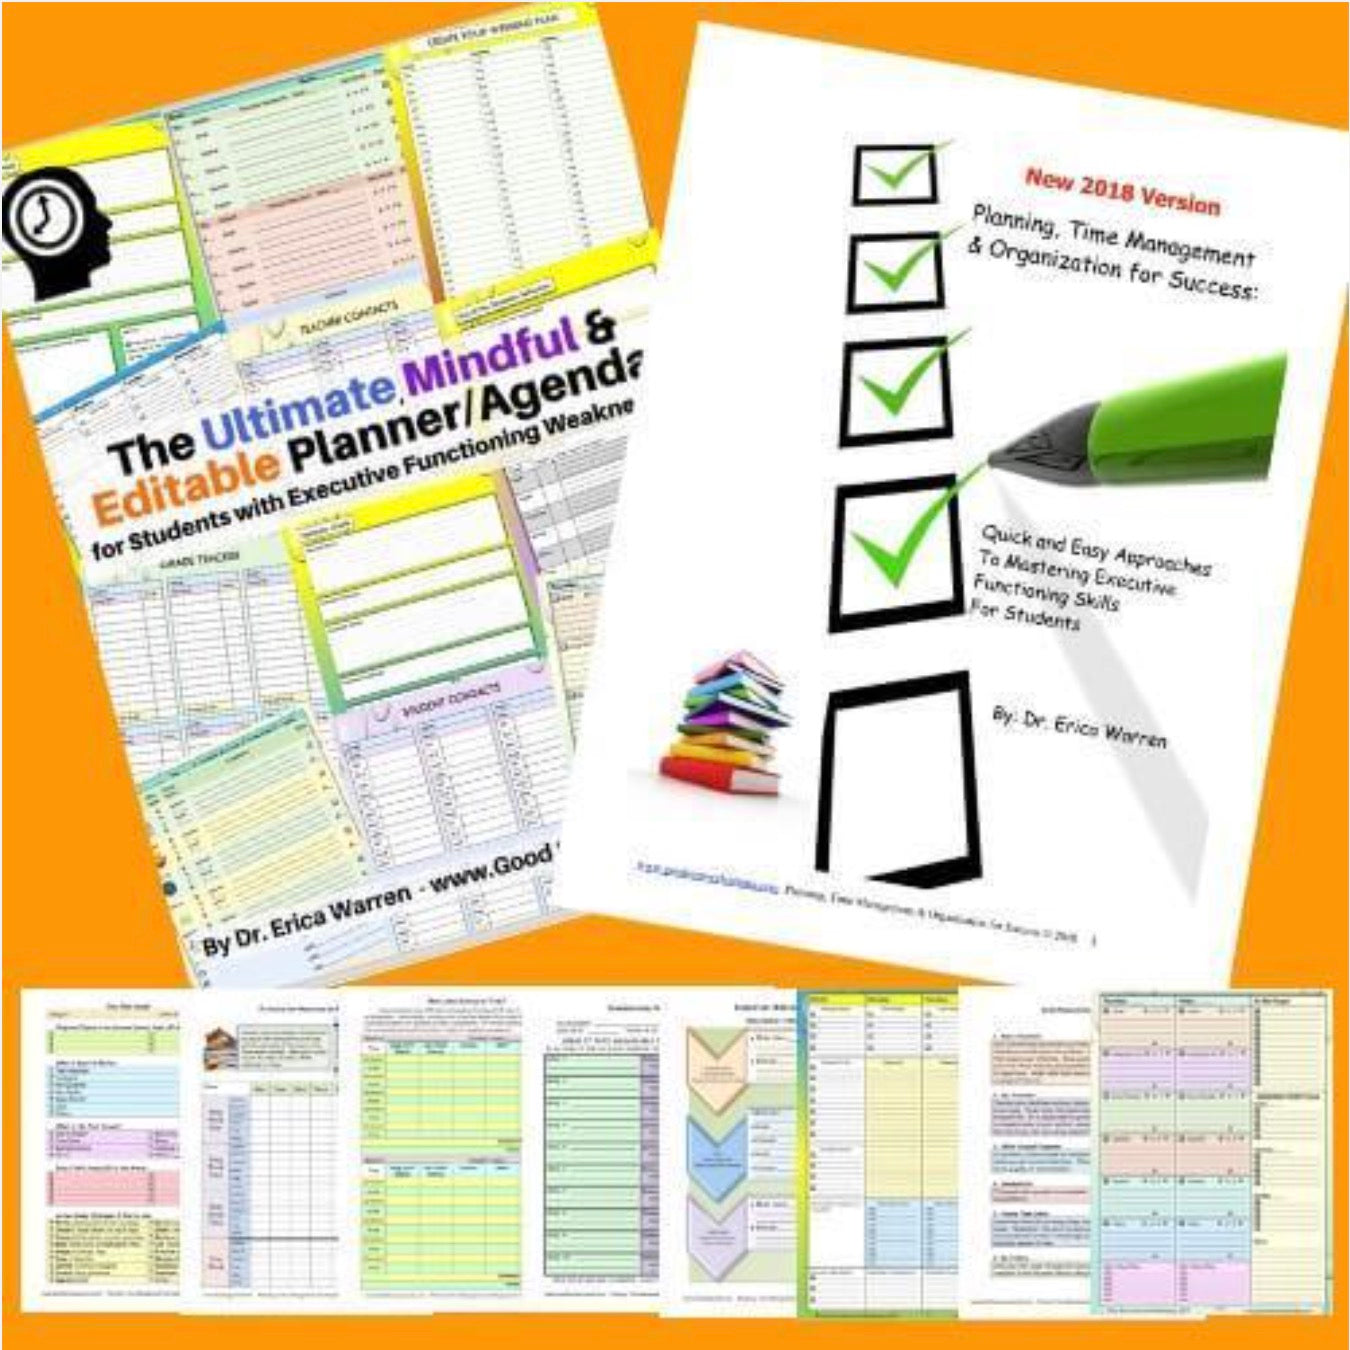 planning time management and organization for success publication